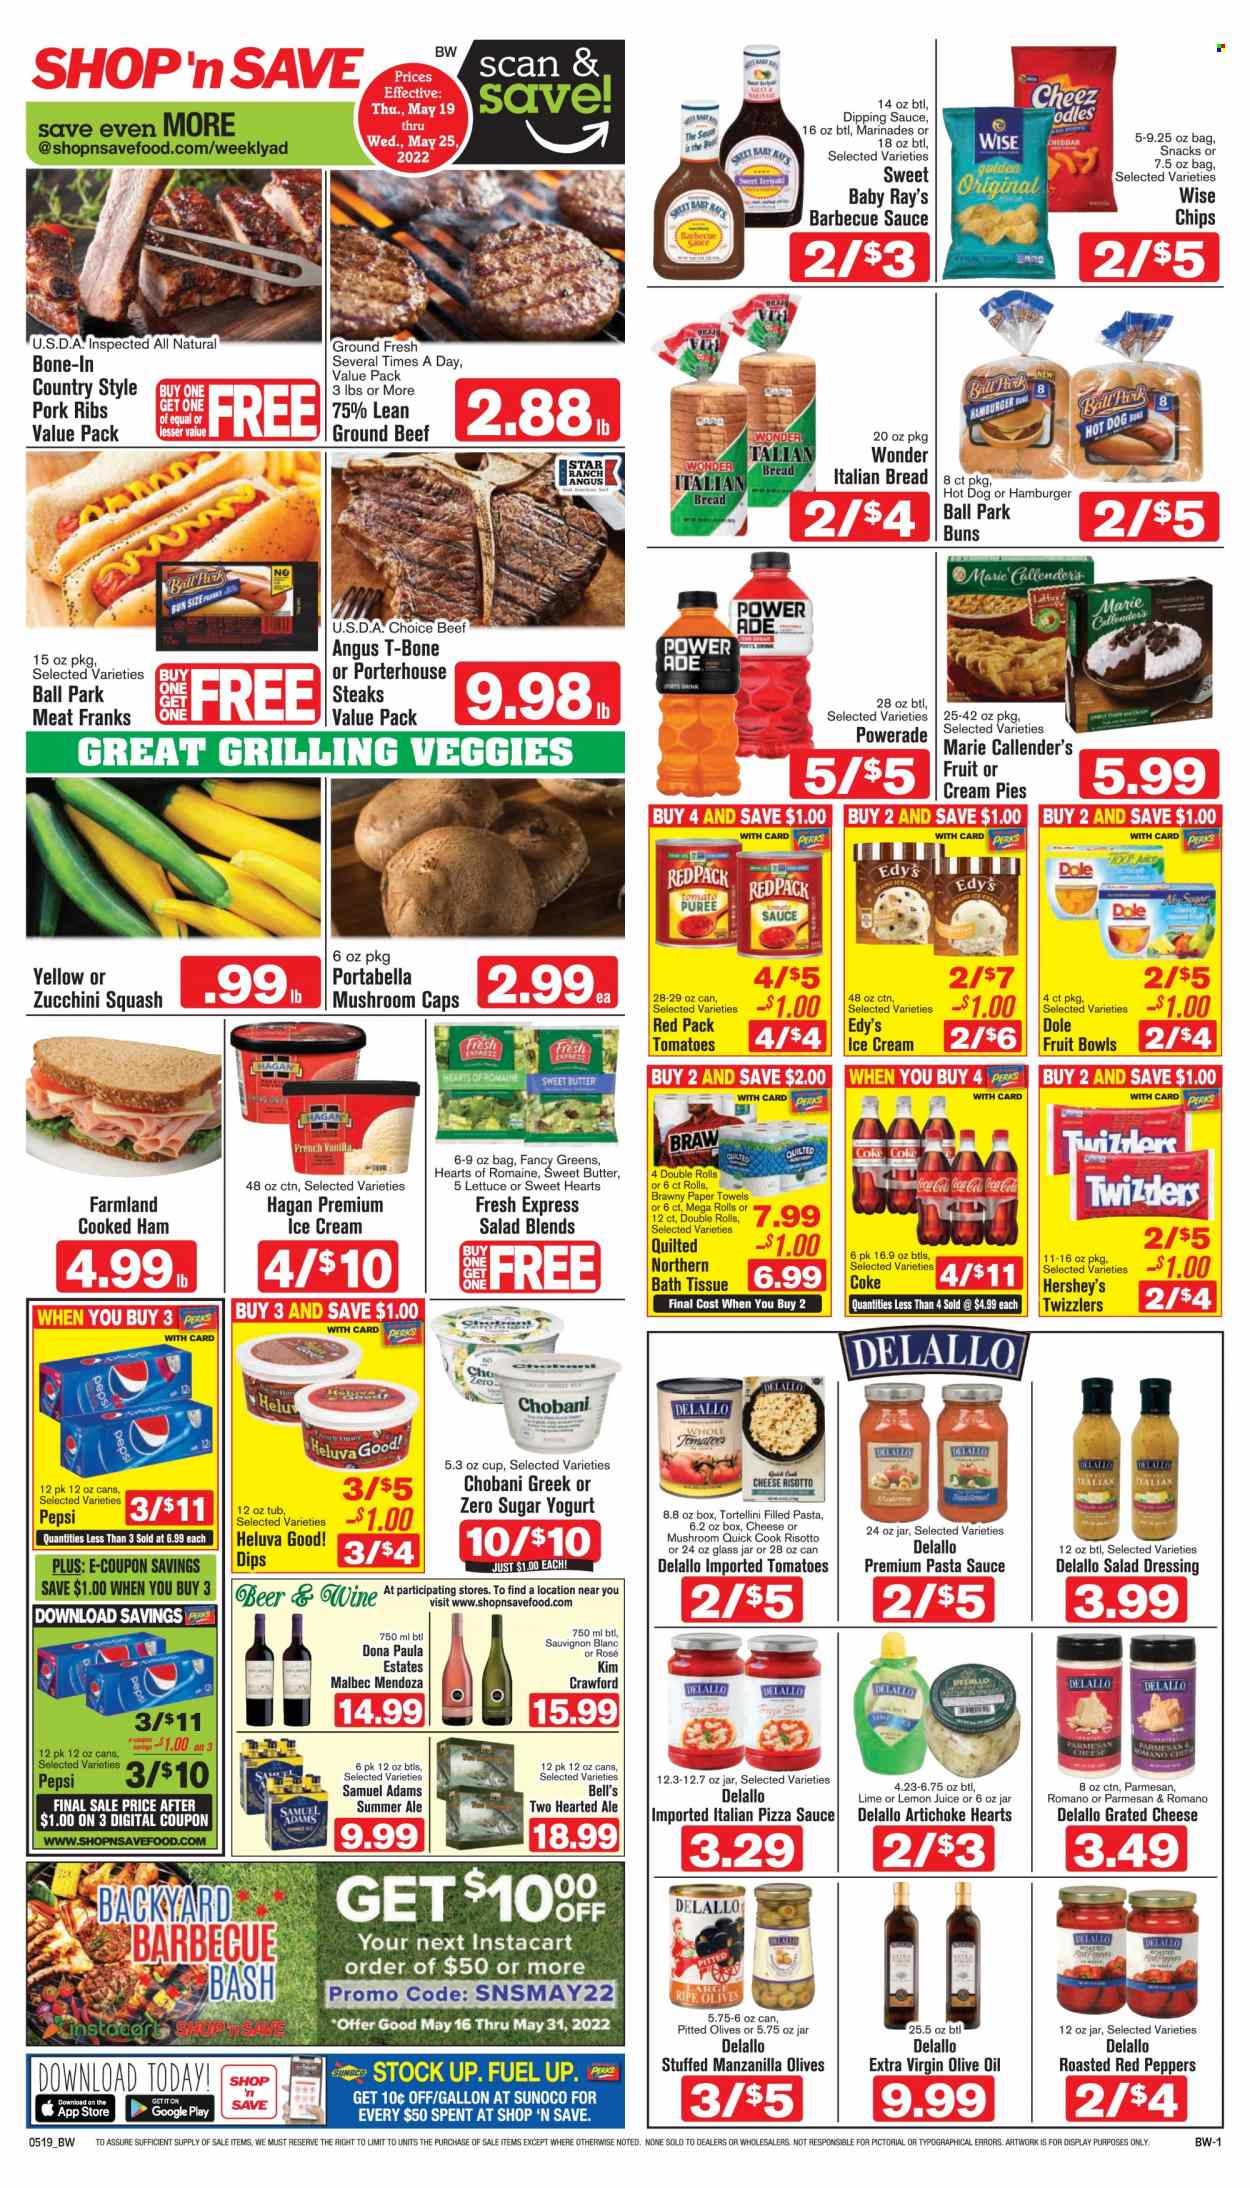 thumbnail - Shop ‘n Save Flyer - 05/19/2022 - 05/25/2022 - Sales products - bread, buns, burger buns, cream pie, artichoke, zucchini, onion, lettuce, Dole, peppers, red peppers, beef meat, ground beef, t-bone steak, steak, portehouse steak, pork meat, pork ribs, hot dog, pasta sauce, tortellini, Marie Callender's, filled pasta, cooked ham, ham, parmesan, grated cheese, yoghurt, Chobani, butter, ice cream, Hershey's, snack, chips, tomato sauce, olives, tomato puree, BBQ sauce, salad dressing, dressing, extra virgin olive oil, olive oil, oil, Coca-Cola, Powerade, Pepsi, lemon juice, white wine, Sauvignon Blanc, rosé wine, bath tissue, Quilted Northern, kitchen towels, paper towels. Page 1.